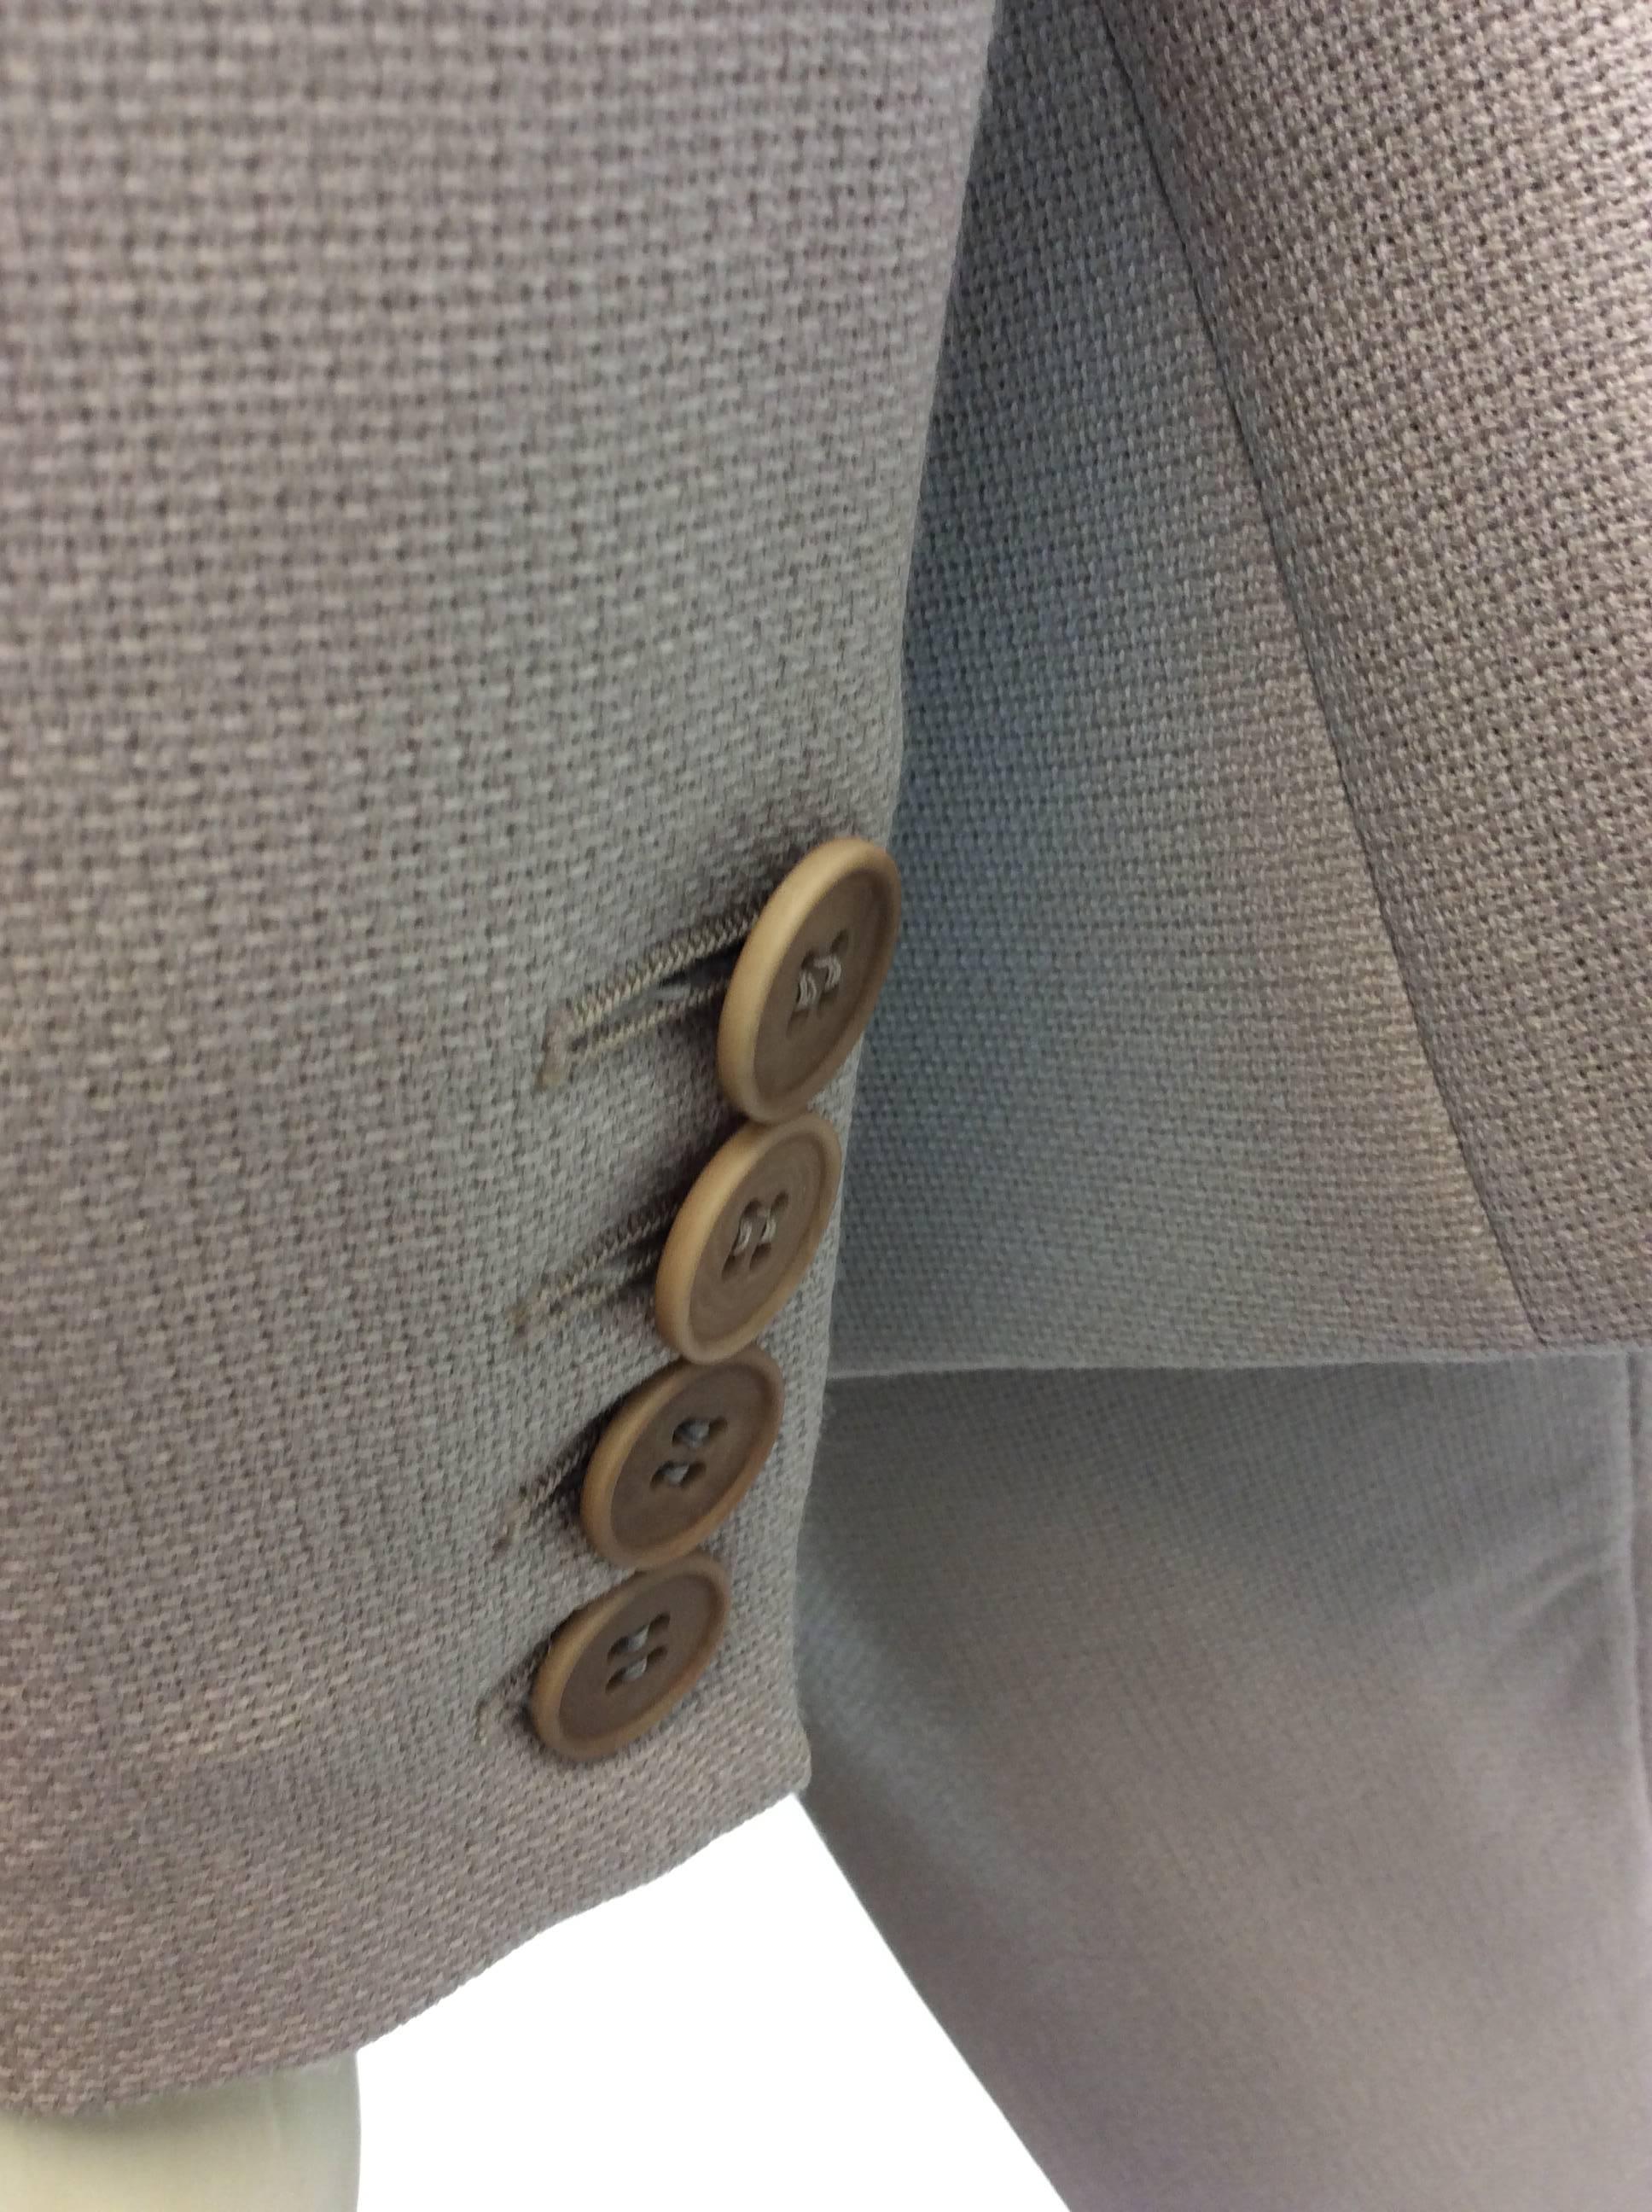 Stella McCartney Tan Pant Suit In Excellent Condition For Sale In Narberth, PA